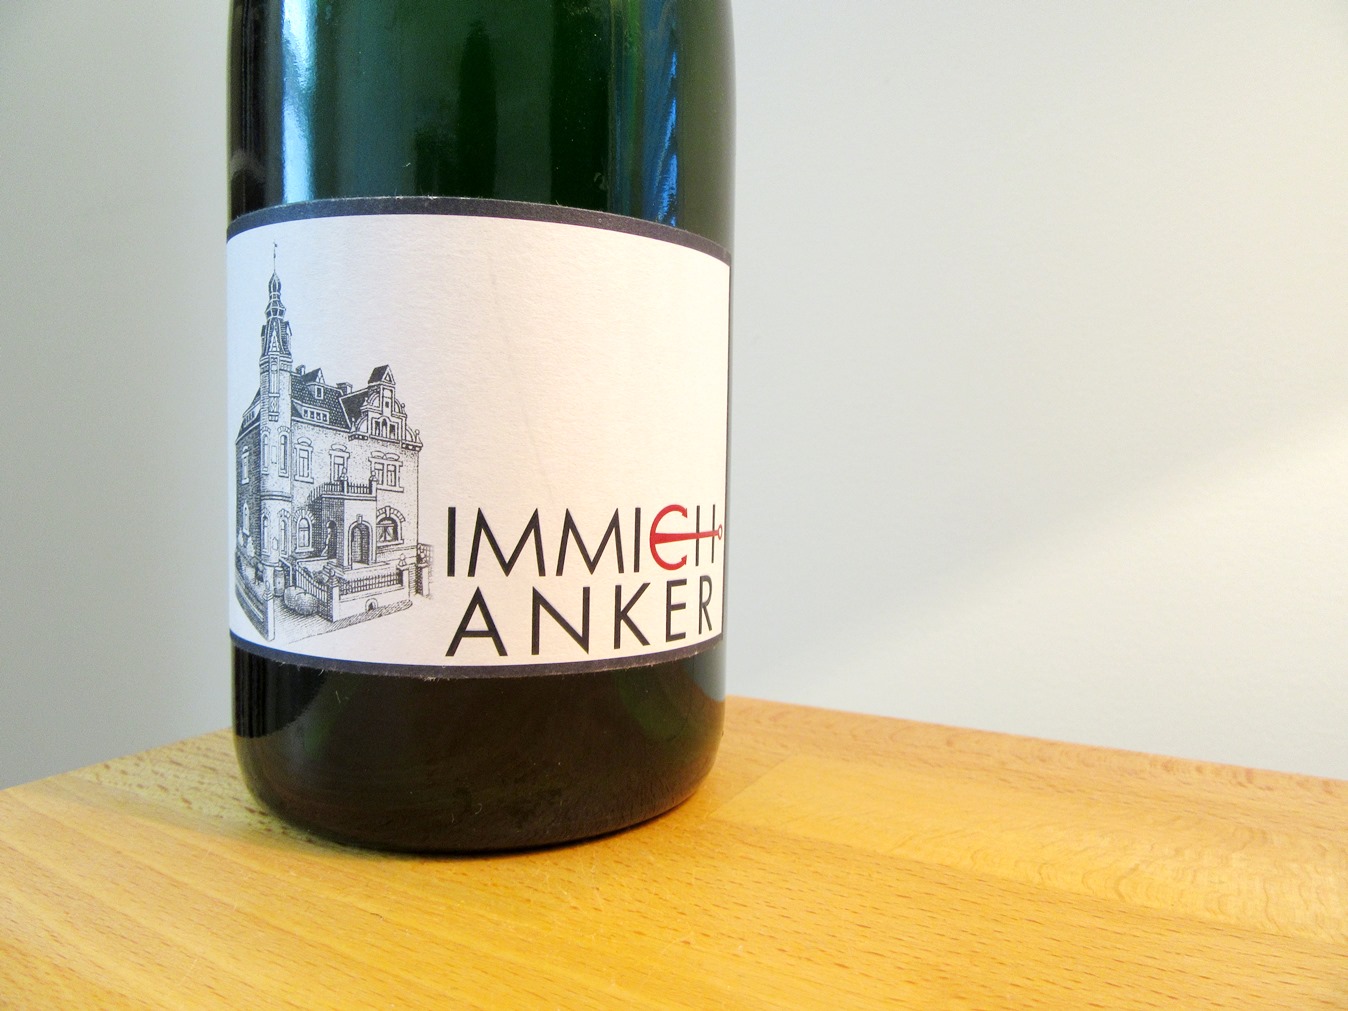 Immich Anker, Enkircher Zeppwingert, Riesling Brut 2013, Mosel, Germany, Wine Casual